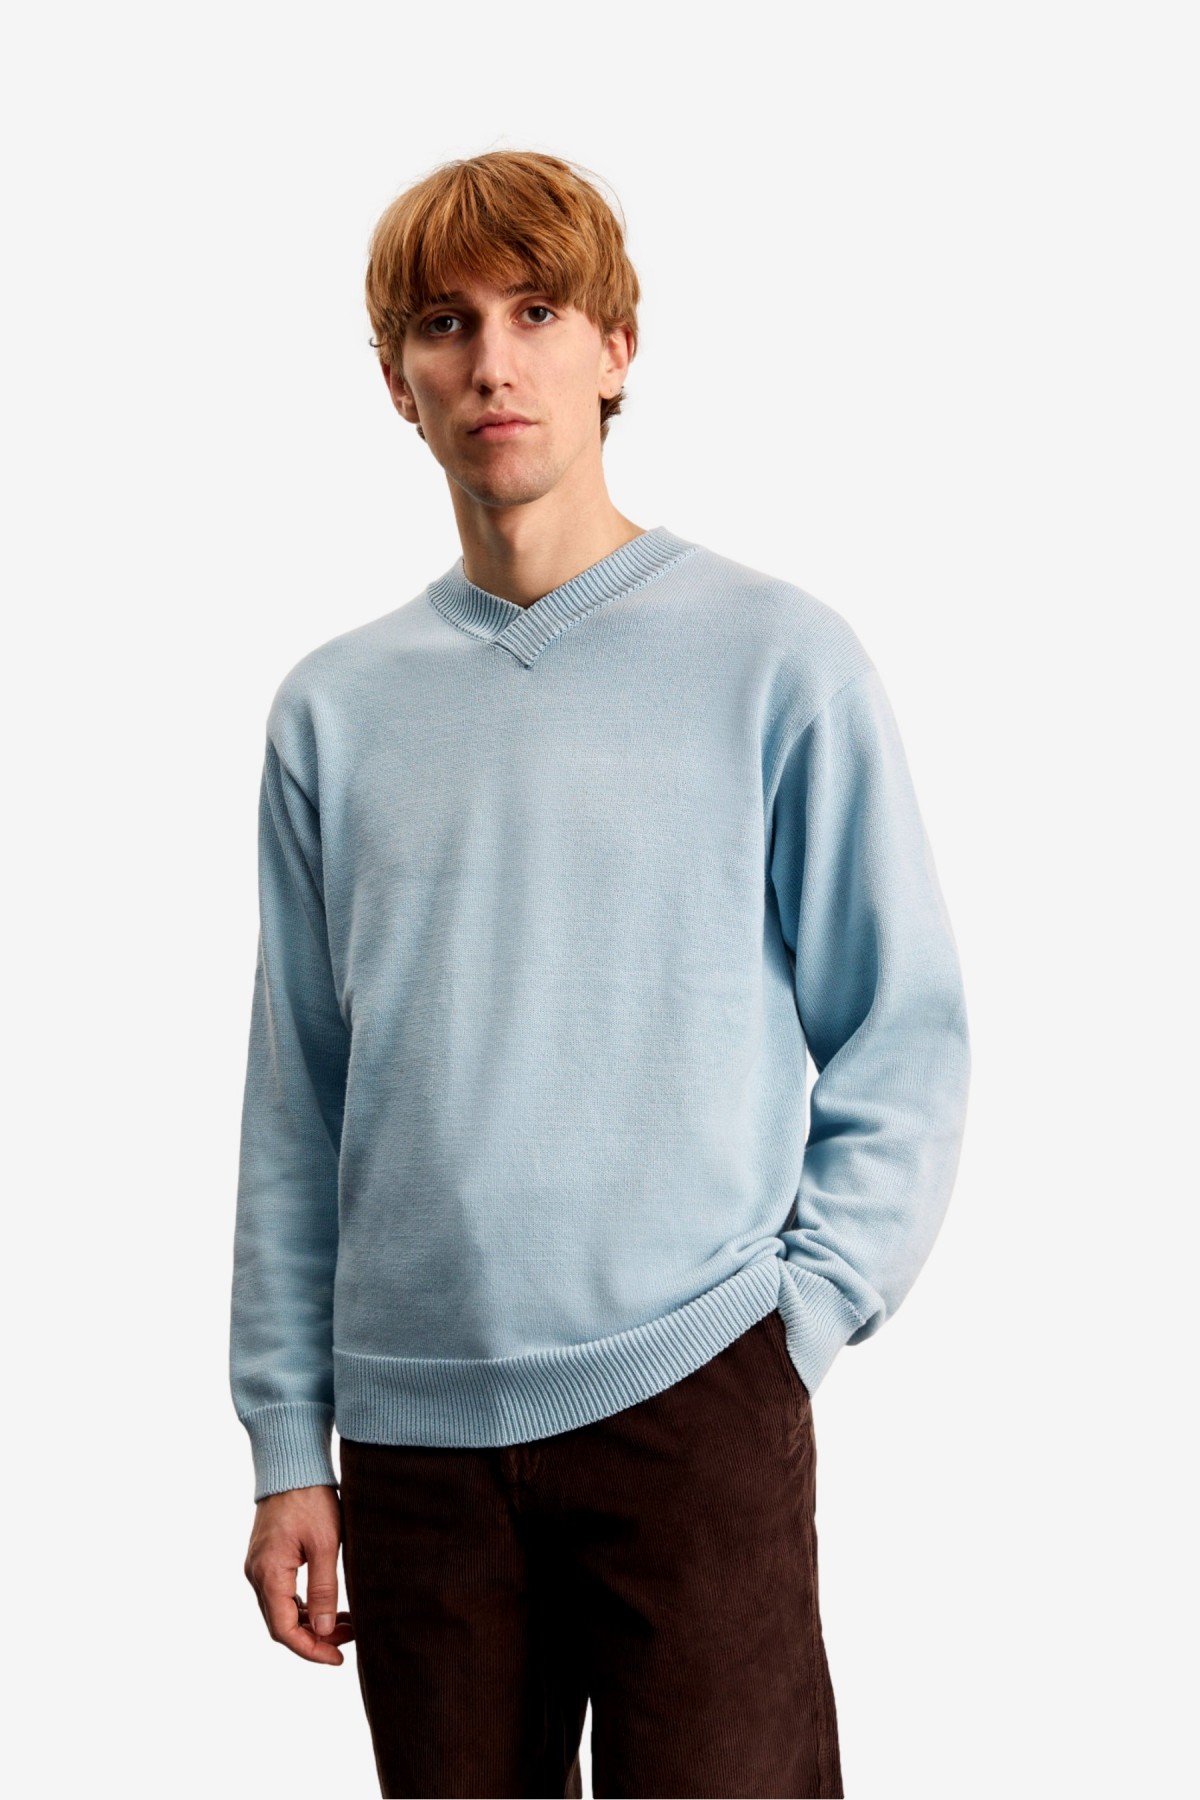 Another Aspect Sweater 3.0 in Sky Blue